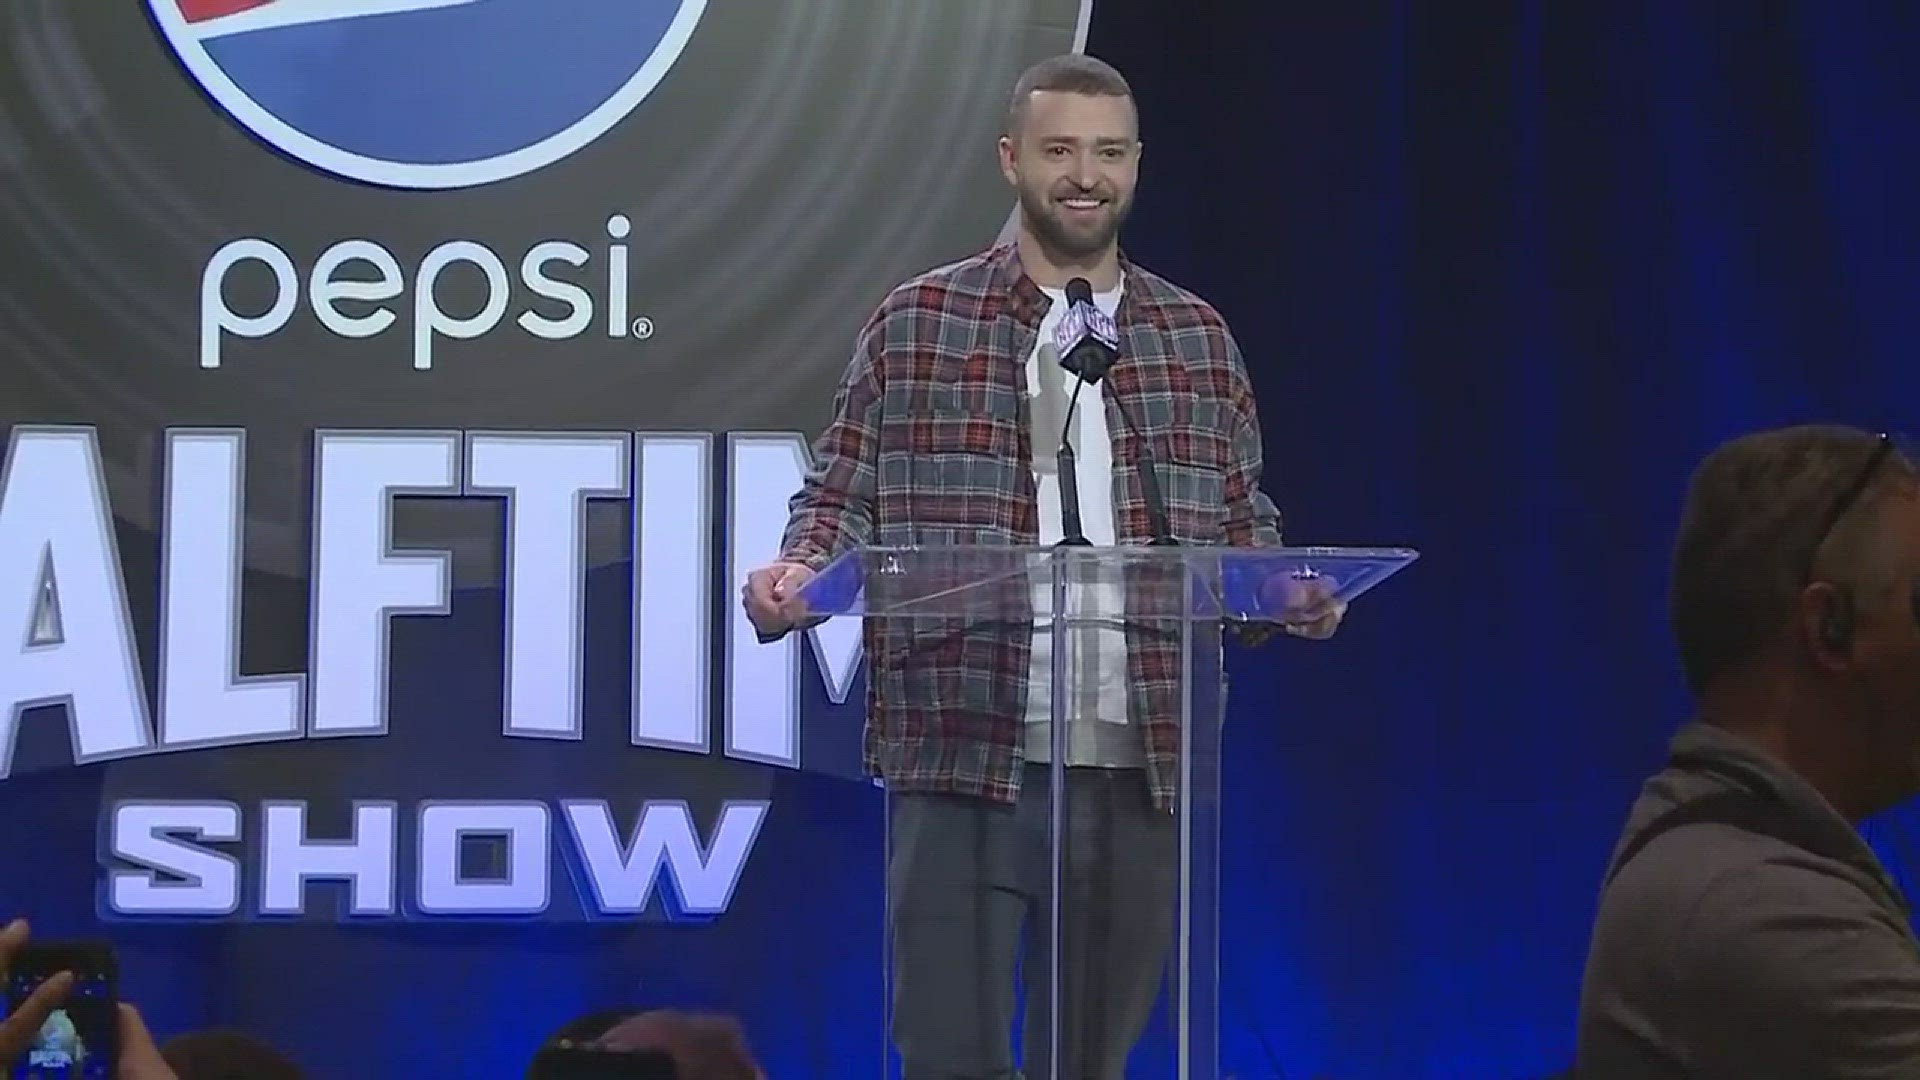 Justin Timberlake met the media Thursday to preview his big Pepsi Super Bowl 52 Half Time Show, and while doing so he talked about his impressions of Minnesota and his musical idol Prince.